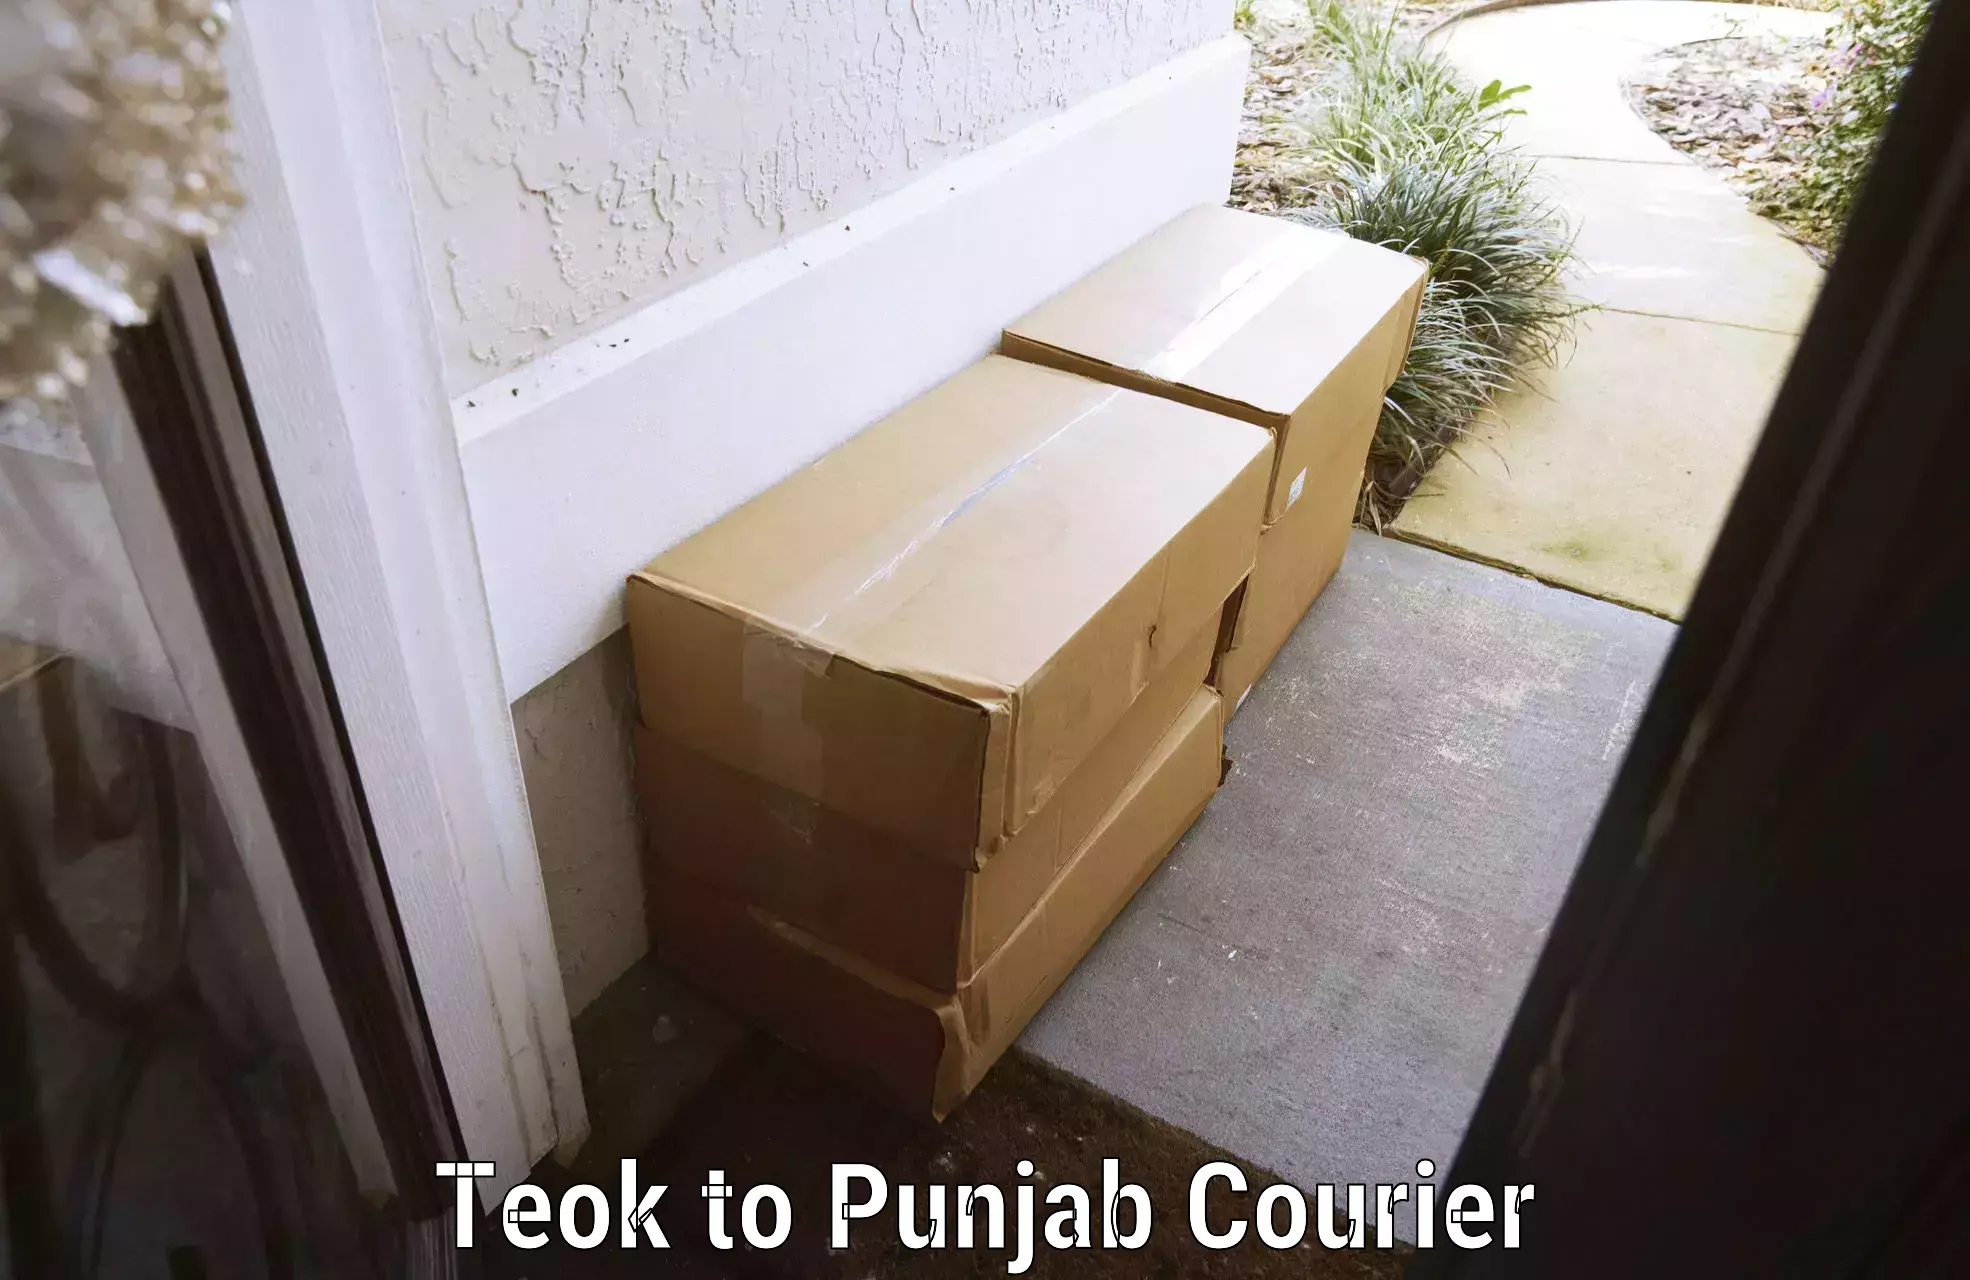 Luggage delivery solutions Teok to Punjab